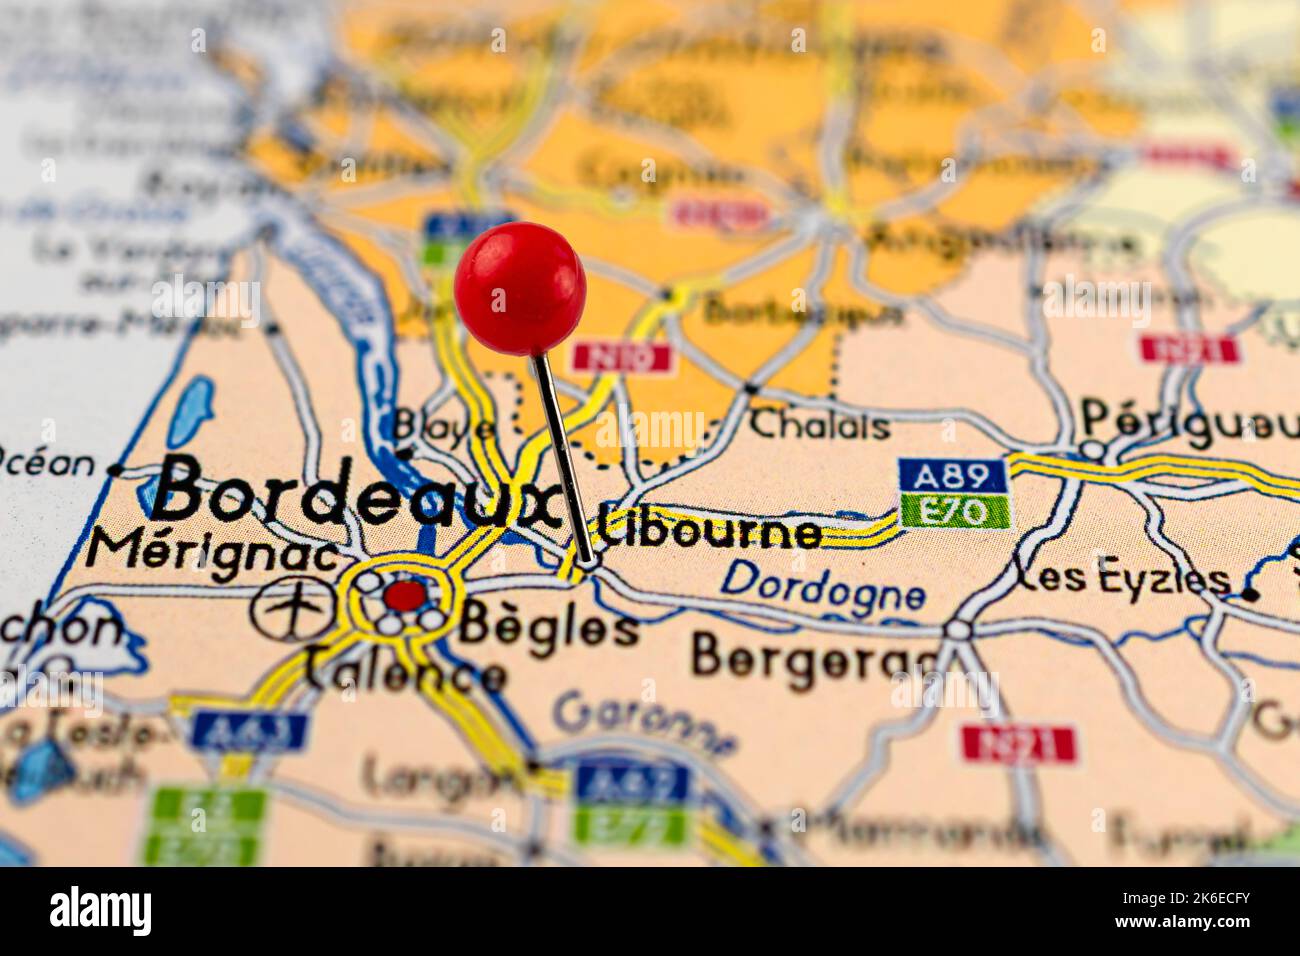 Libourne map. Libourne pin map. Close up of Libourne map with red pin. Map with red pin point of Libourne in France. Stock Photo